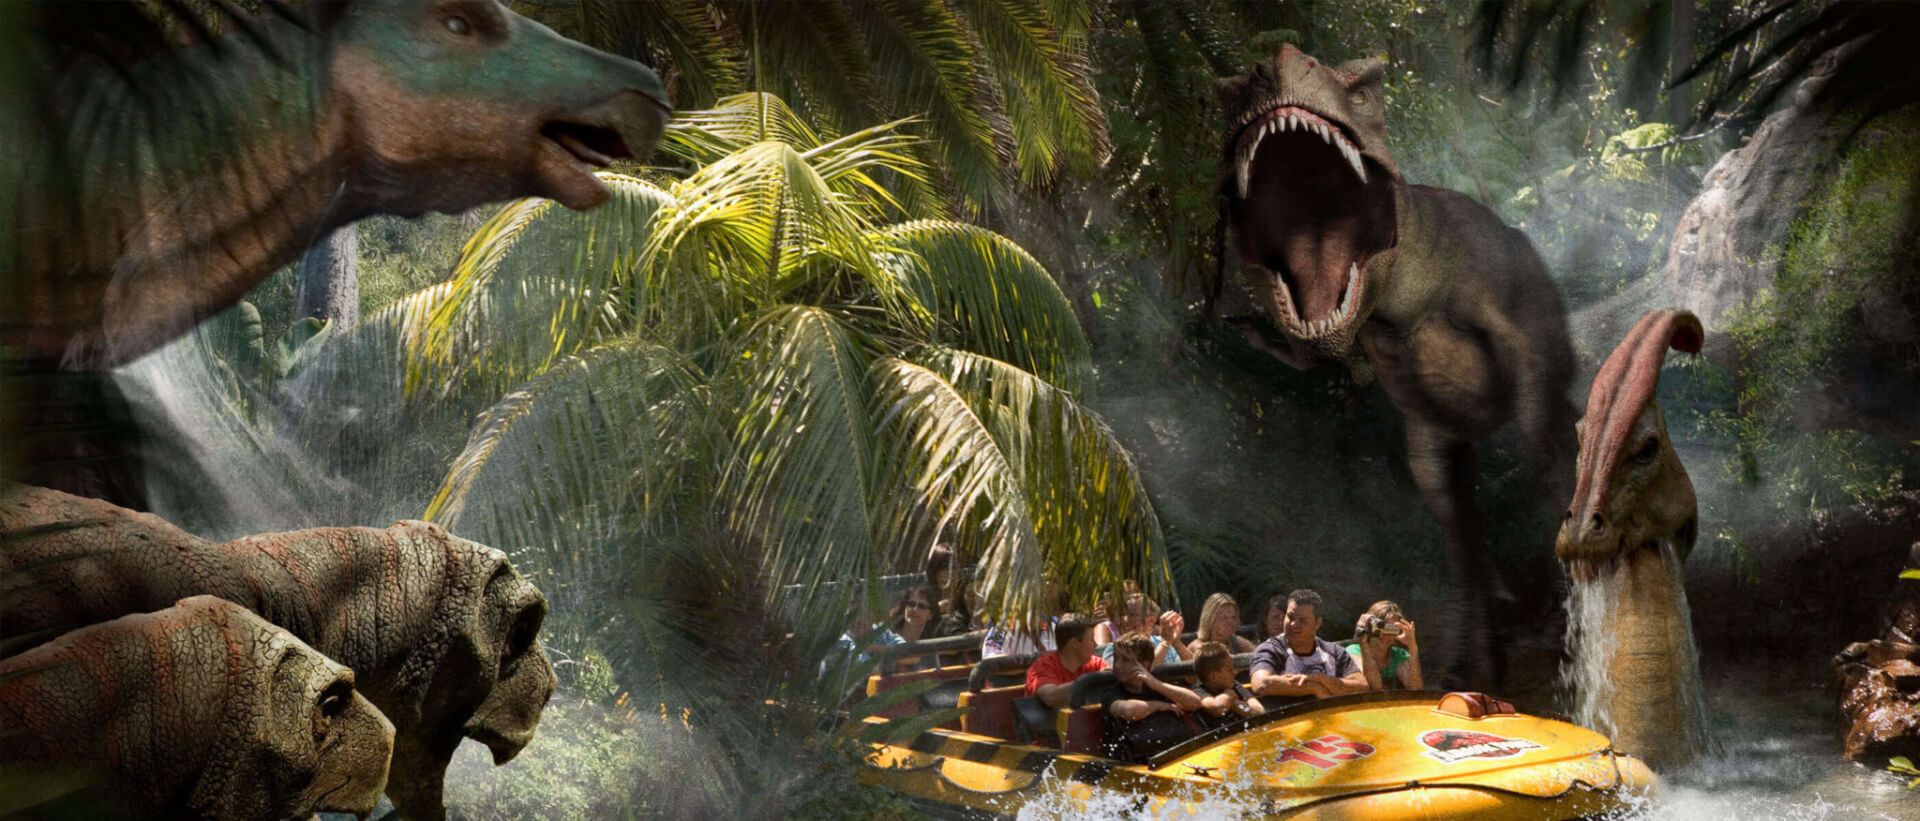 the dinosaurs on the jurassic world ride at universal